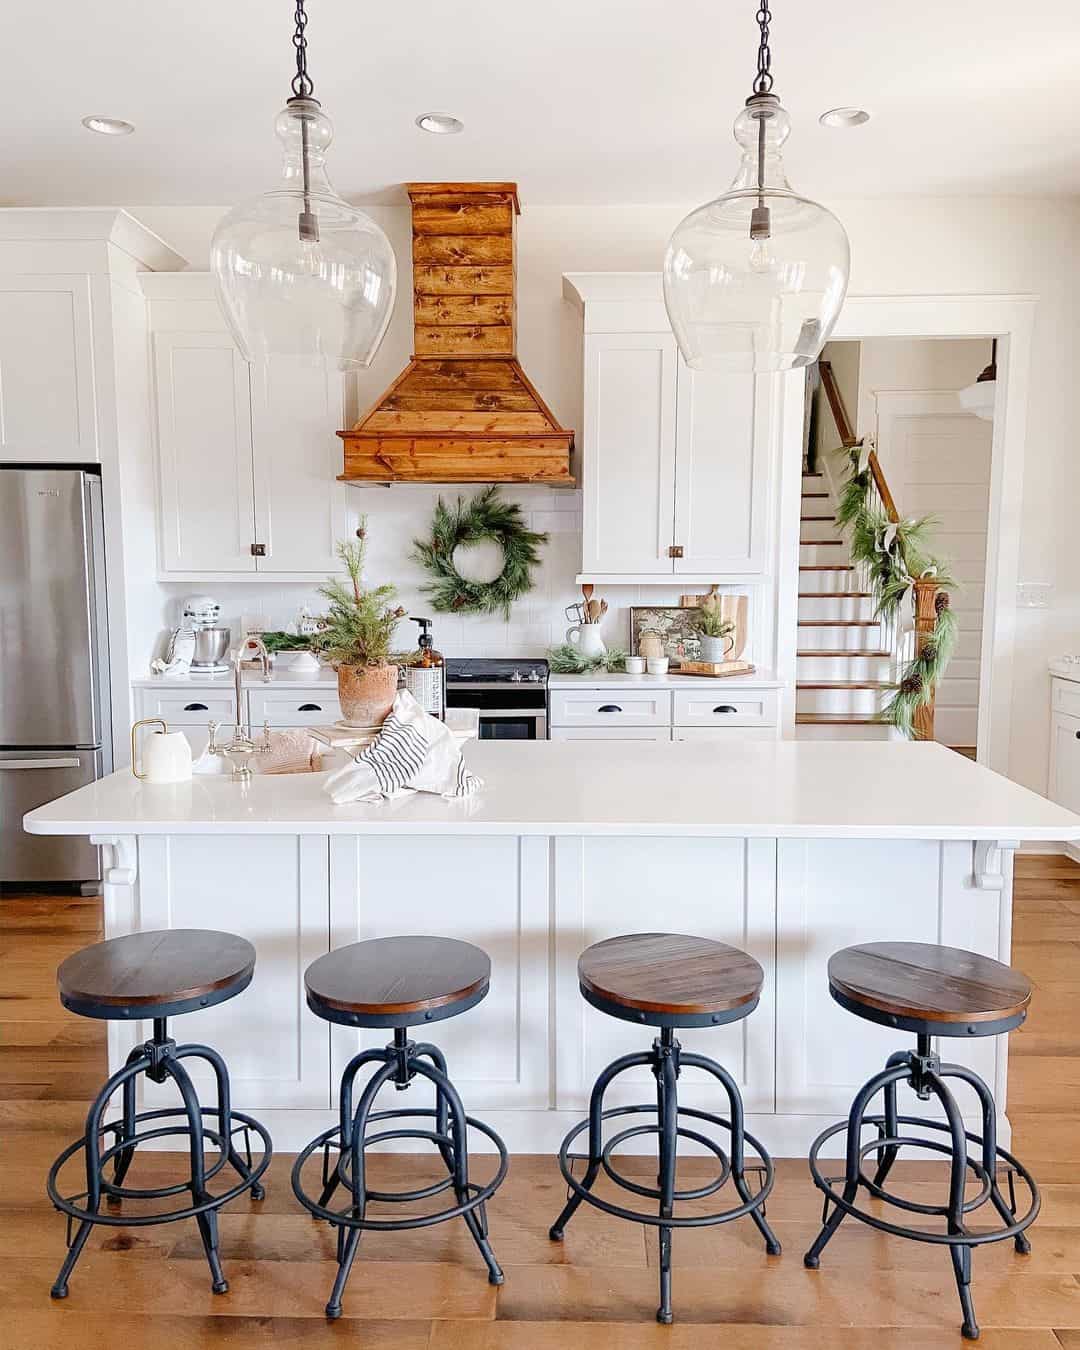 All-White Kitchen Transformed with Wood Accents